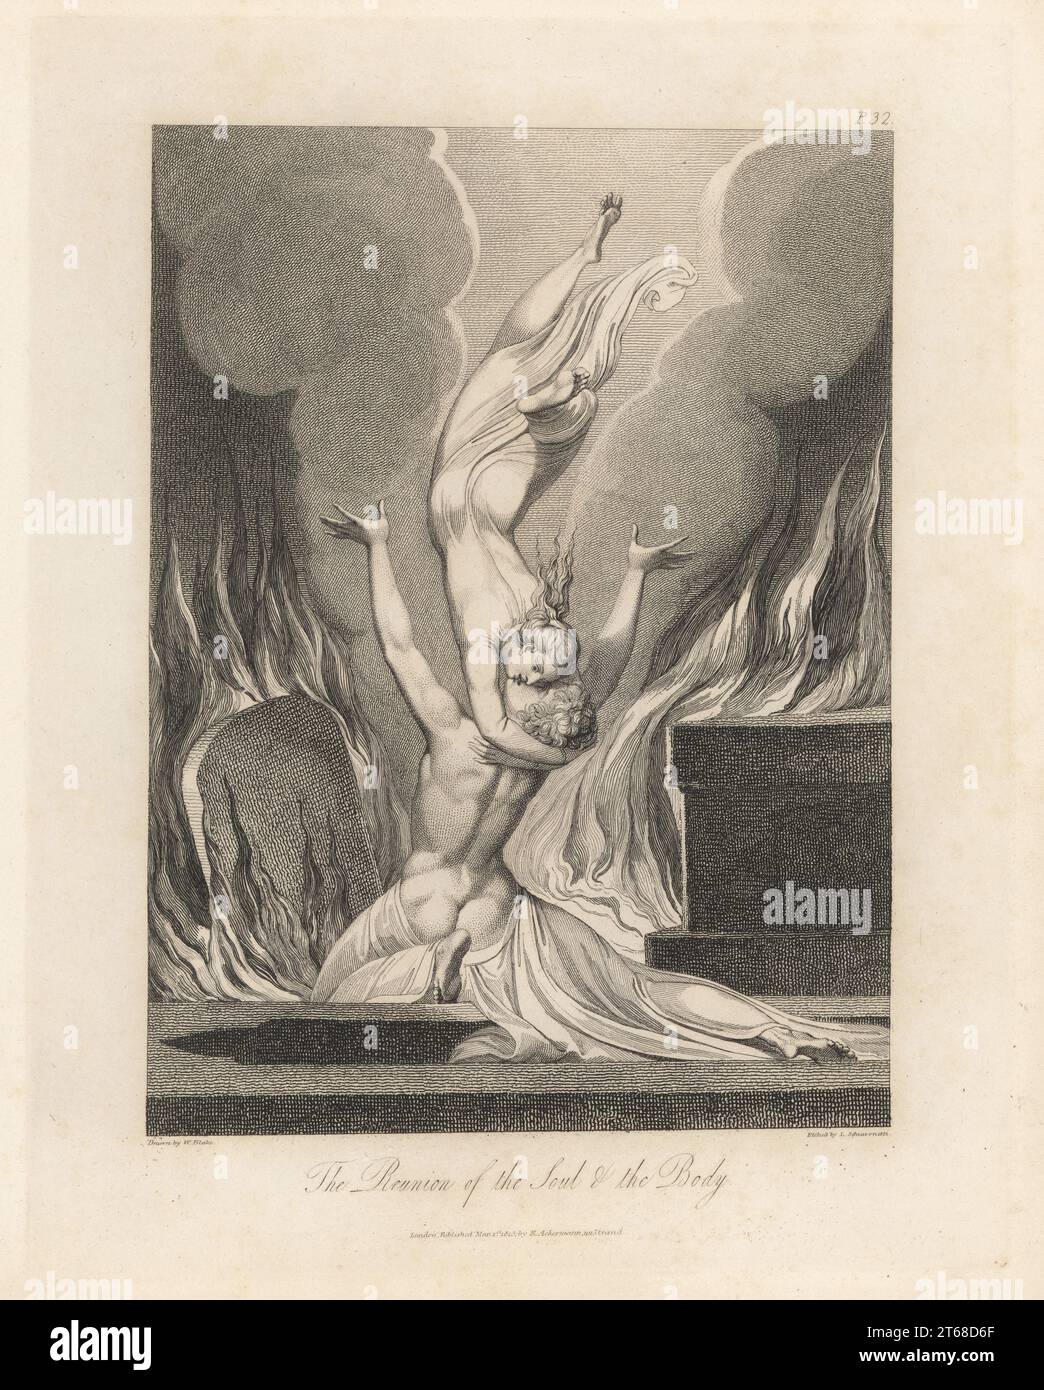 The Reunion of the Soul and the Body (Plate X). A male figure embraced by a shrouded woman spirit diving from above. Flames and smoke billow from a tomb and gravestone. Copperplate engraving by Louis Schiavonetti after an original drawing by William Blake from Robert Blairs The Grave, T. Bensley for Rudolph Ackermann, 1813. Stock Photo